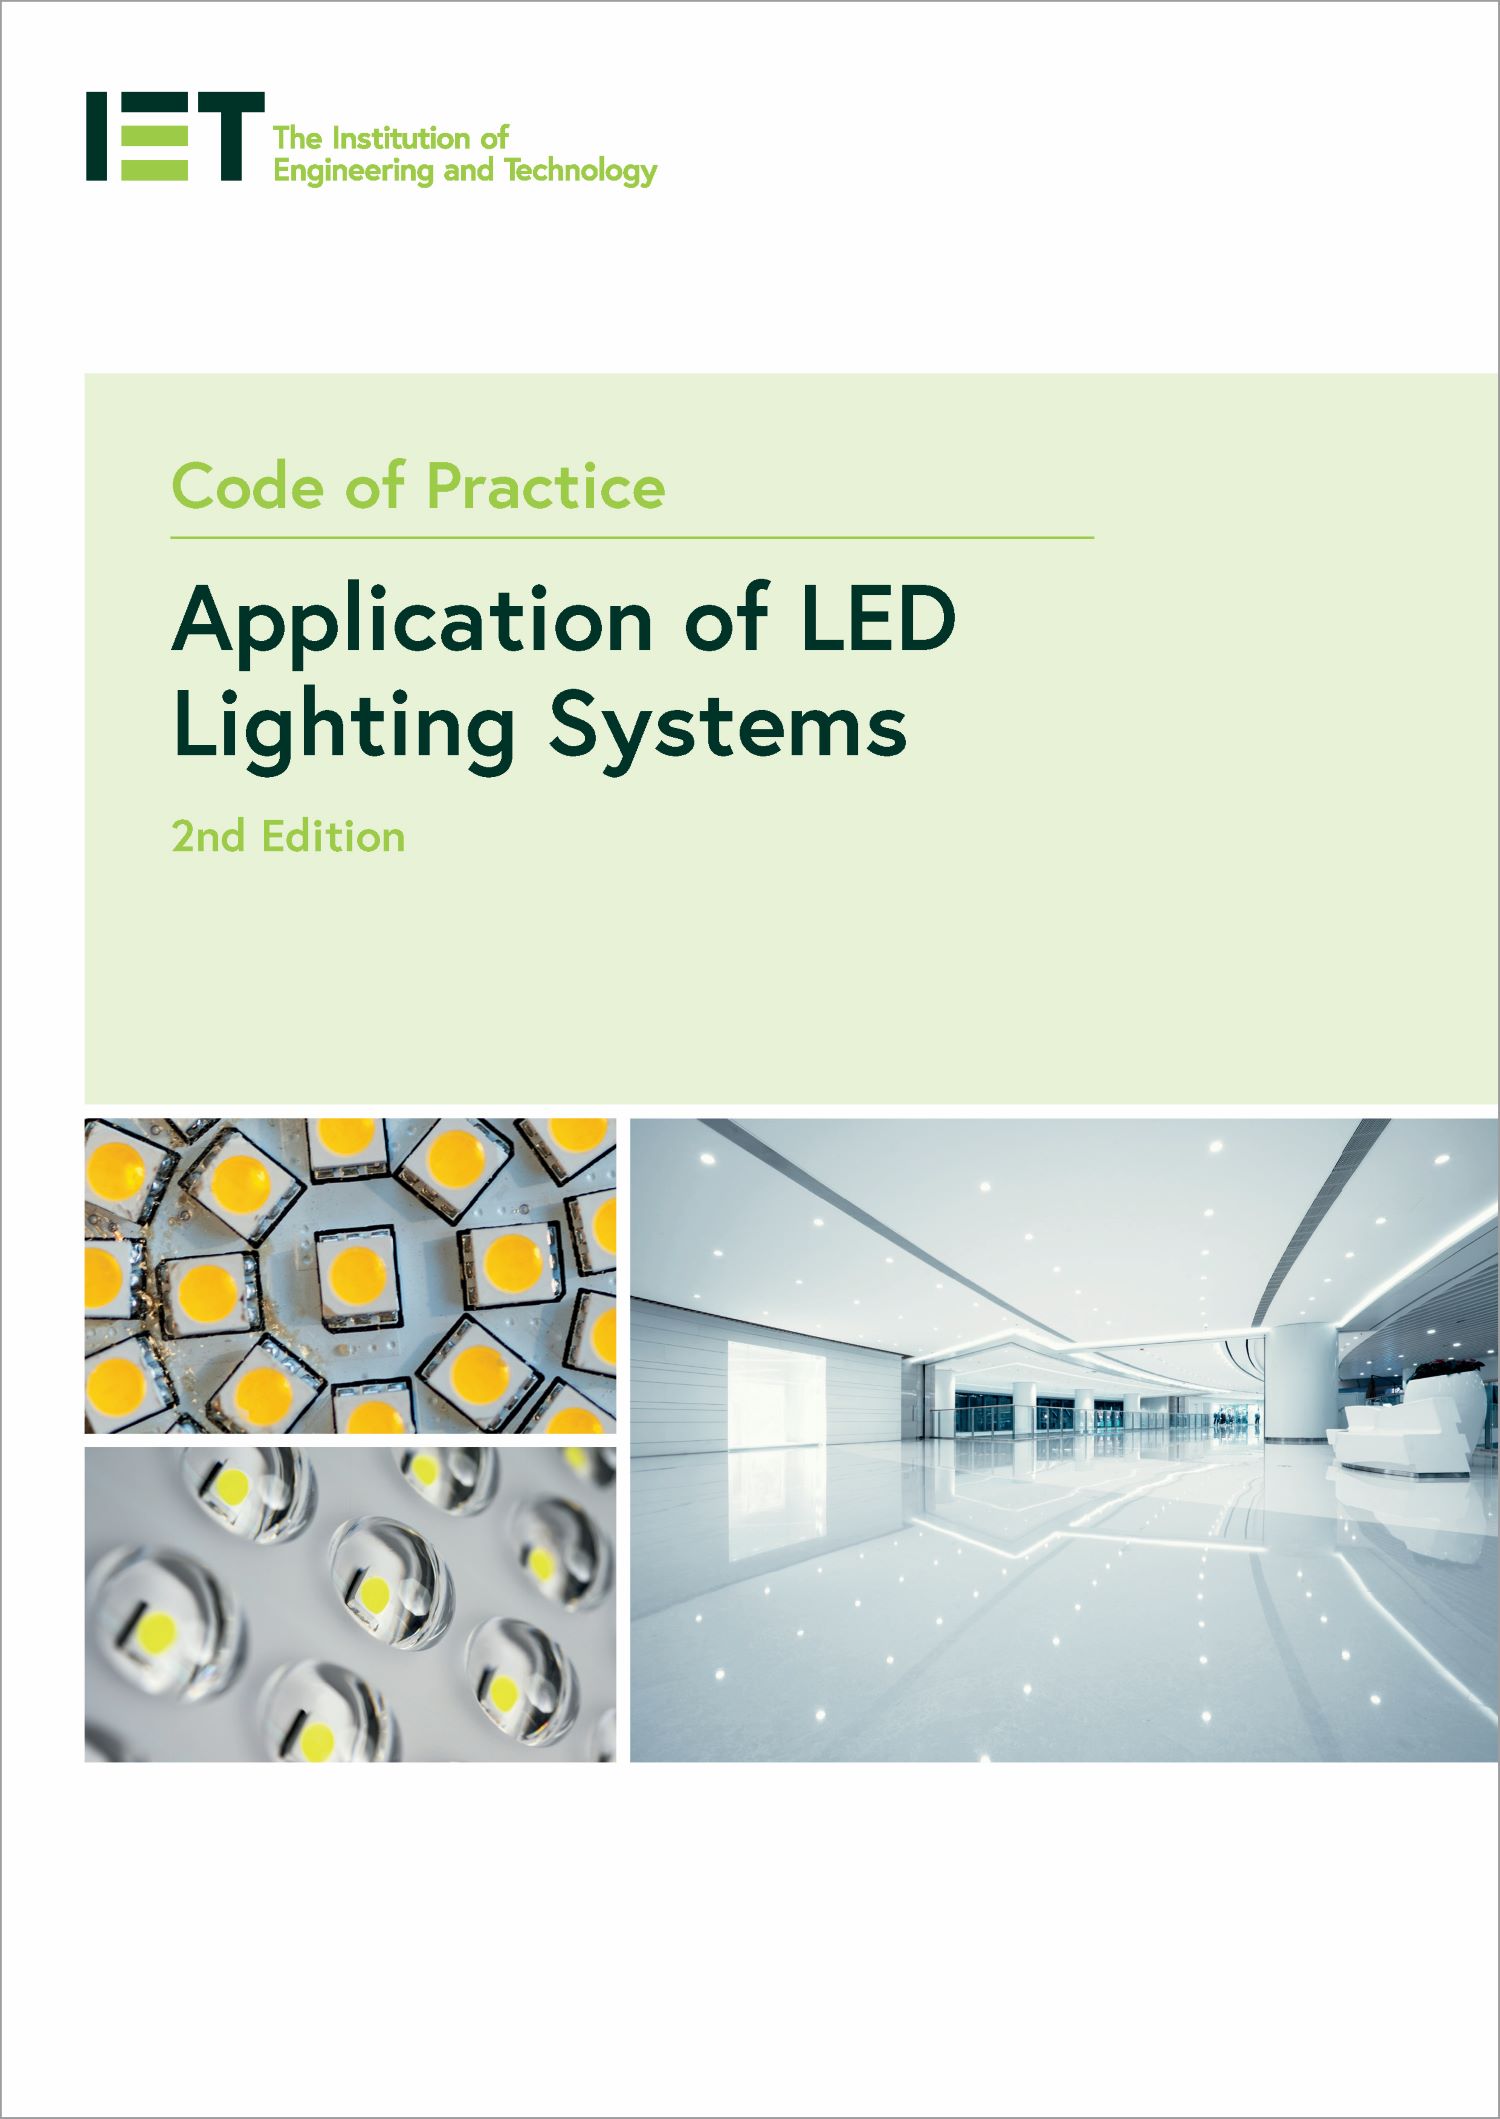 Code of Practice for the Application of LED Lighting Systems, 2nd Edition